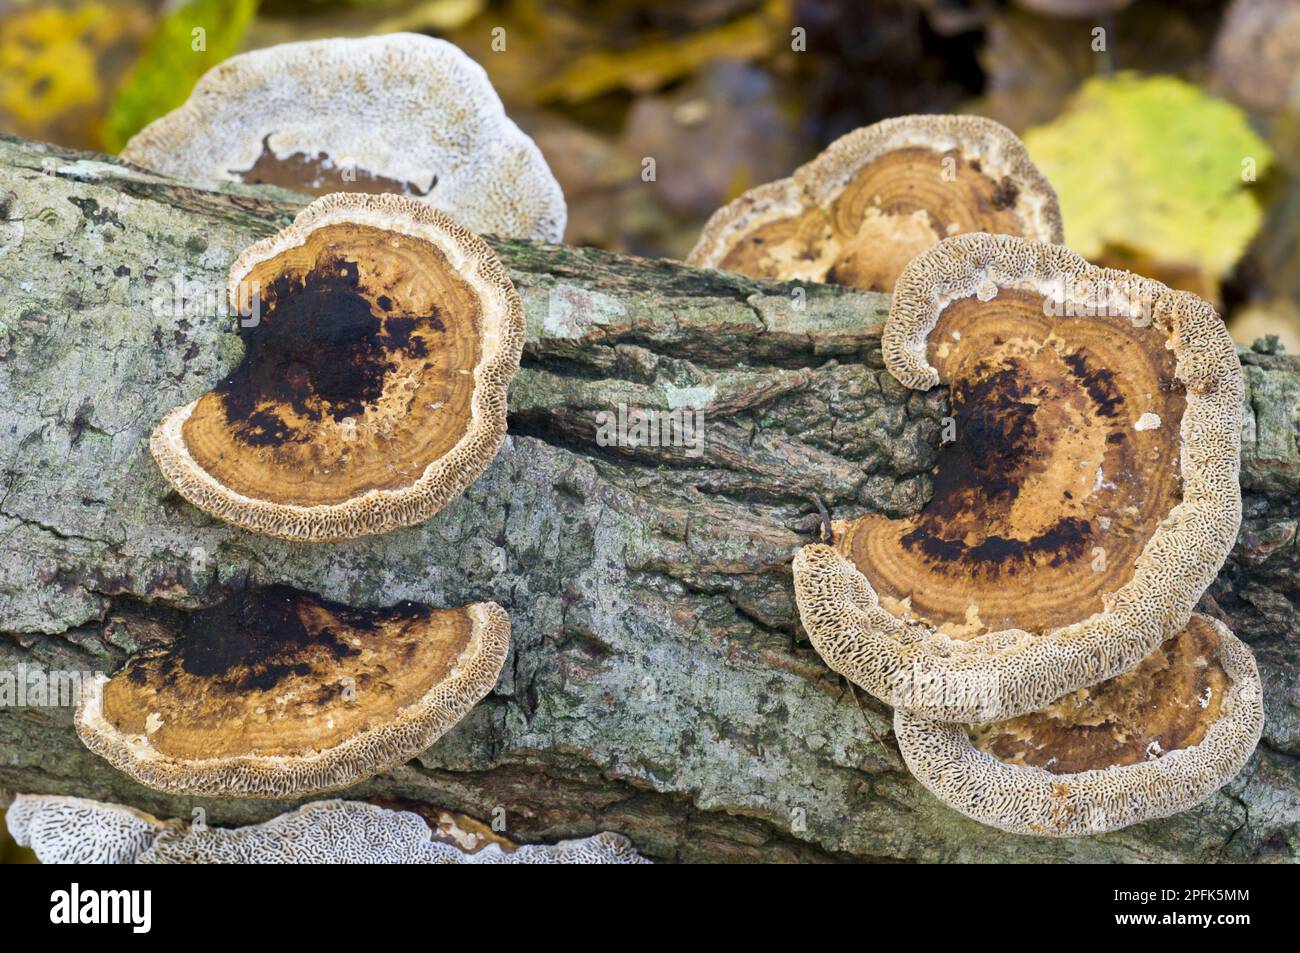 Blushing Bracket (Daedaleopsis confragosa) fruiting bodies, some brackets are upside down indicating that log has been turned, growing on dead wood Stock Photo